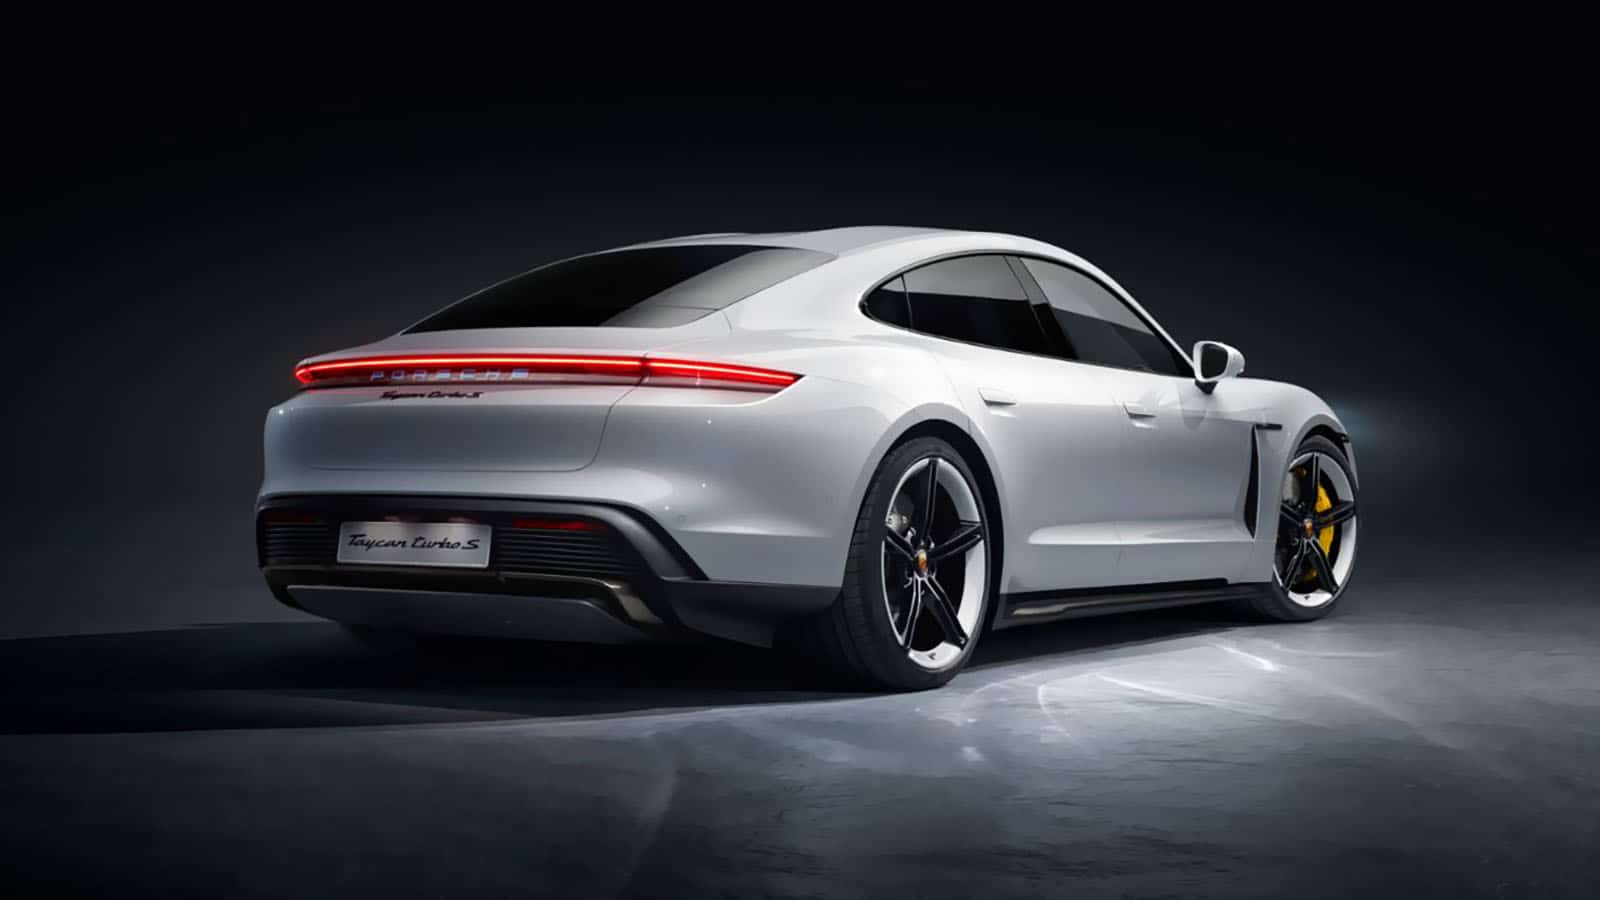 EPA range figures rise for entire 2023 Porsche Taycan lineup Most improved are the Taycan Turbo, which is now estimated at 238 miles, and the Turbo S, which Porsche says now achieves 222 miles.